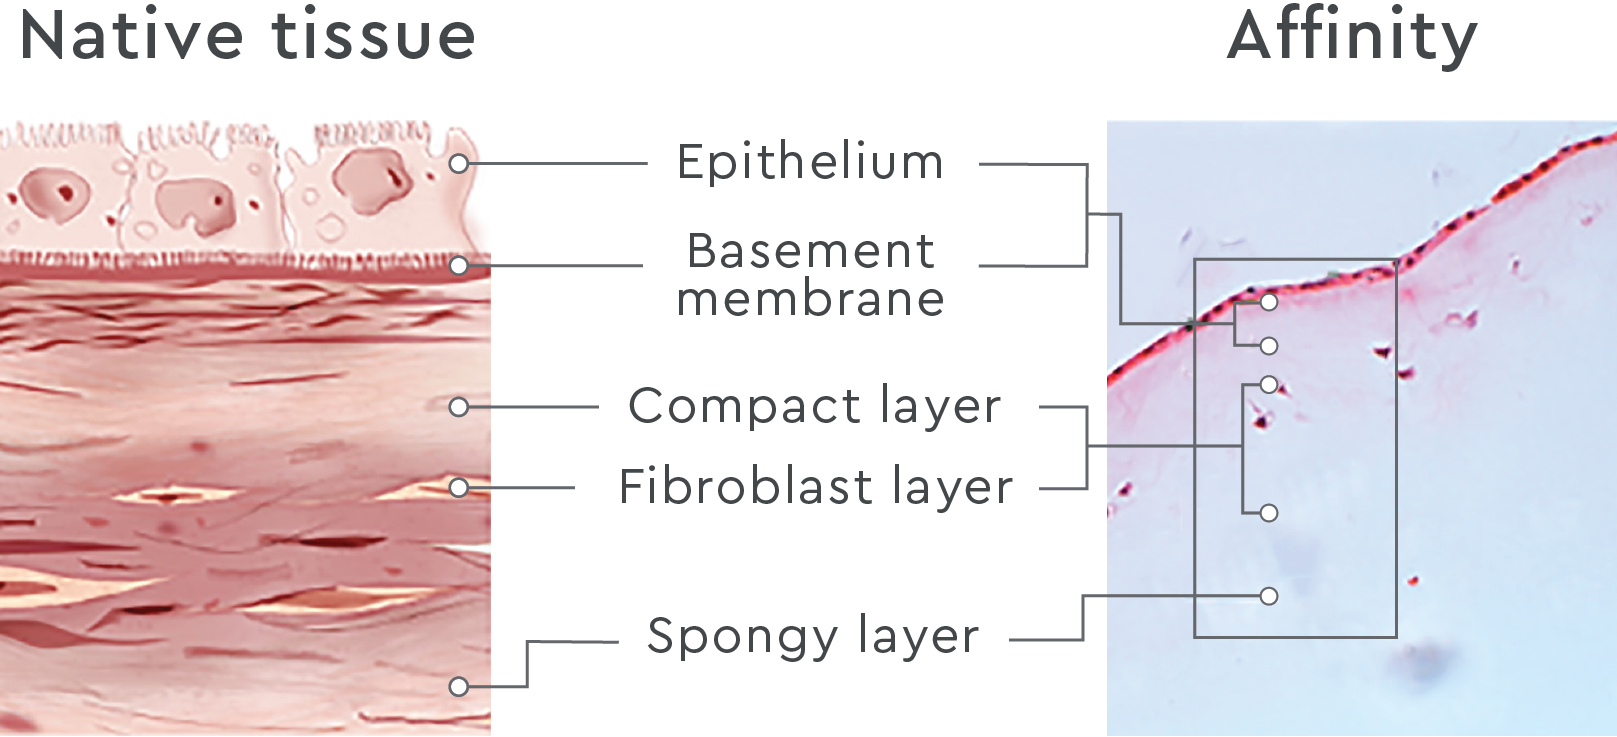 The epithelium, basement membrane, compact layer, fibroblast layer, and spongy layer in Affinity